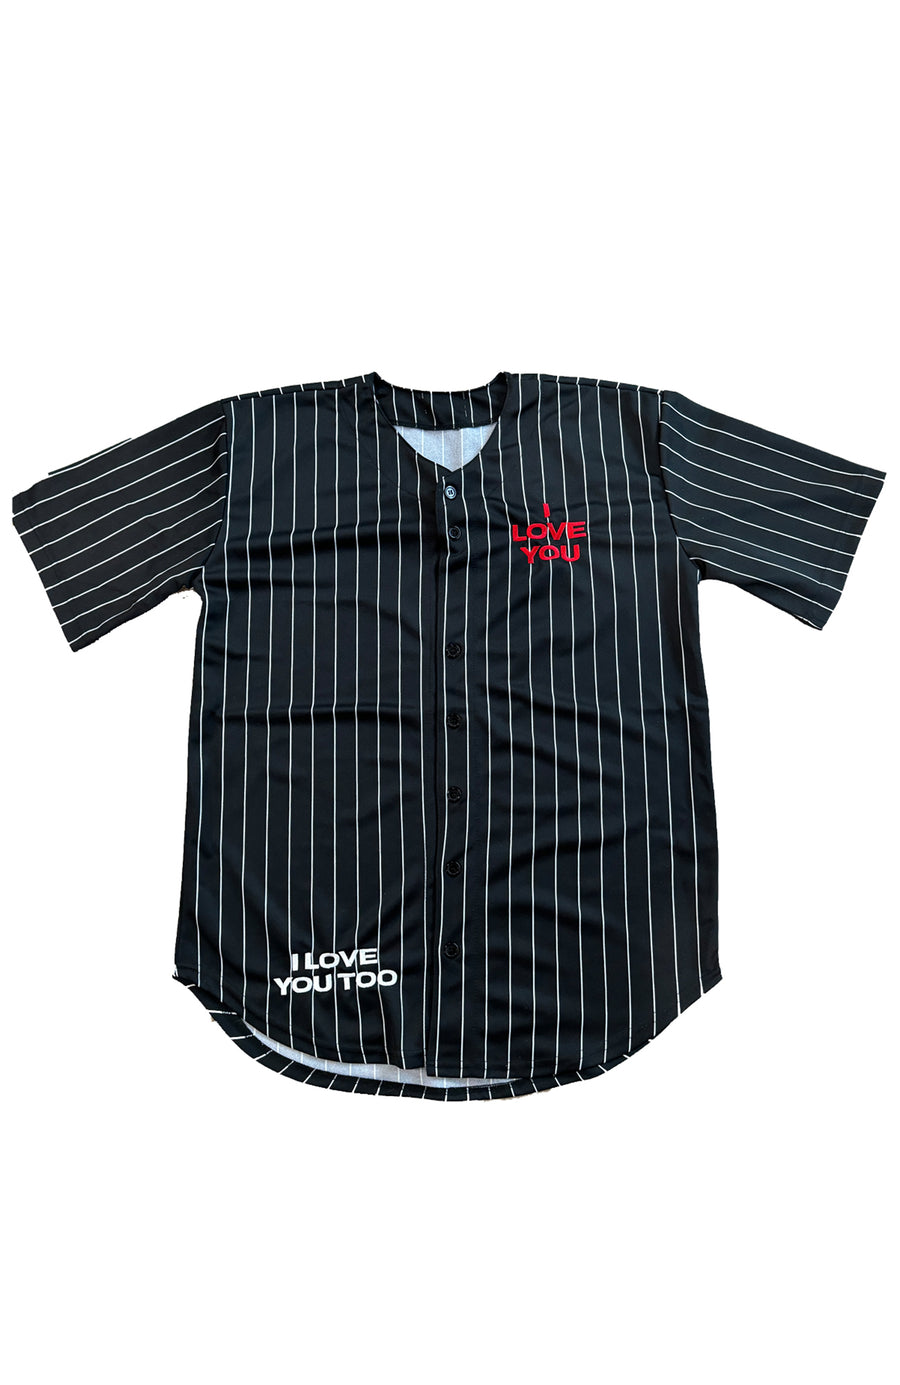 I Love You Jersey (LIMITED)